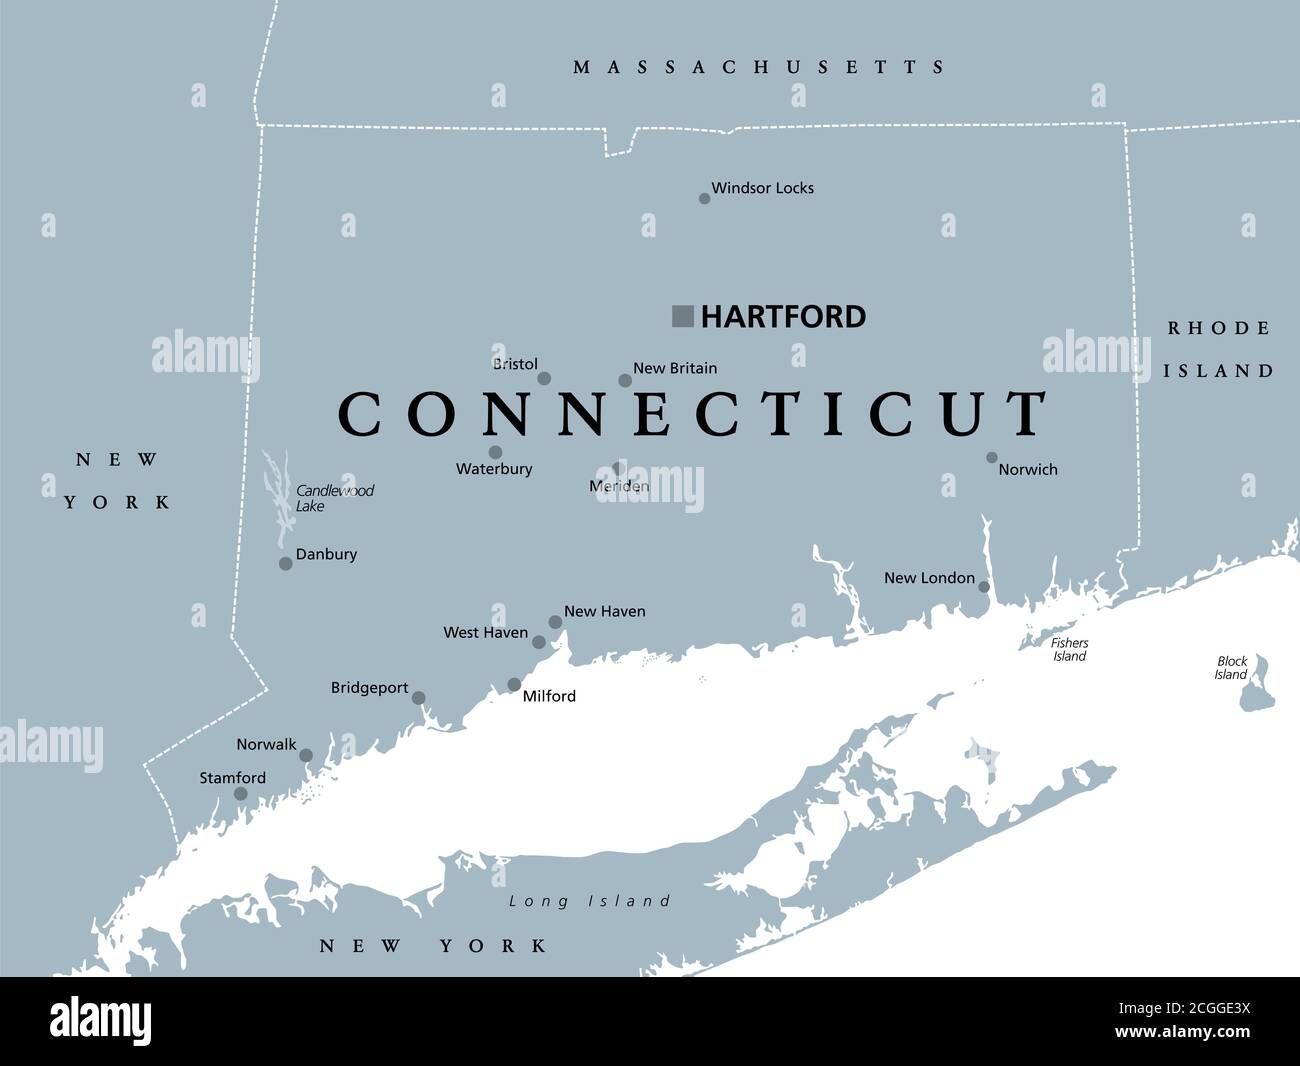 Connecticut Political Map With Capital Hartford State Of Connecticut Ct Southernmost State In New England Region Of Northeastern United States Stock Photo Alamy